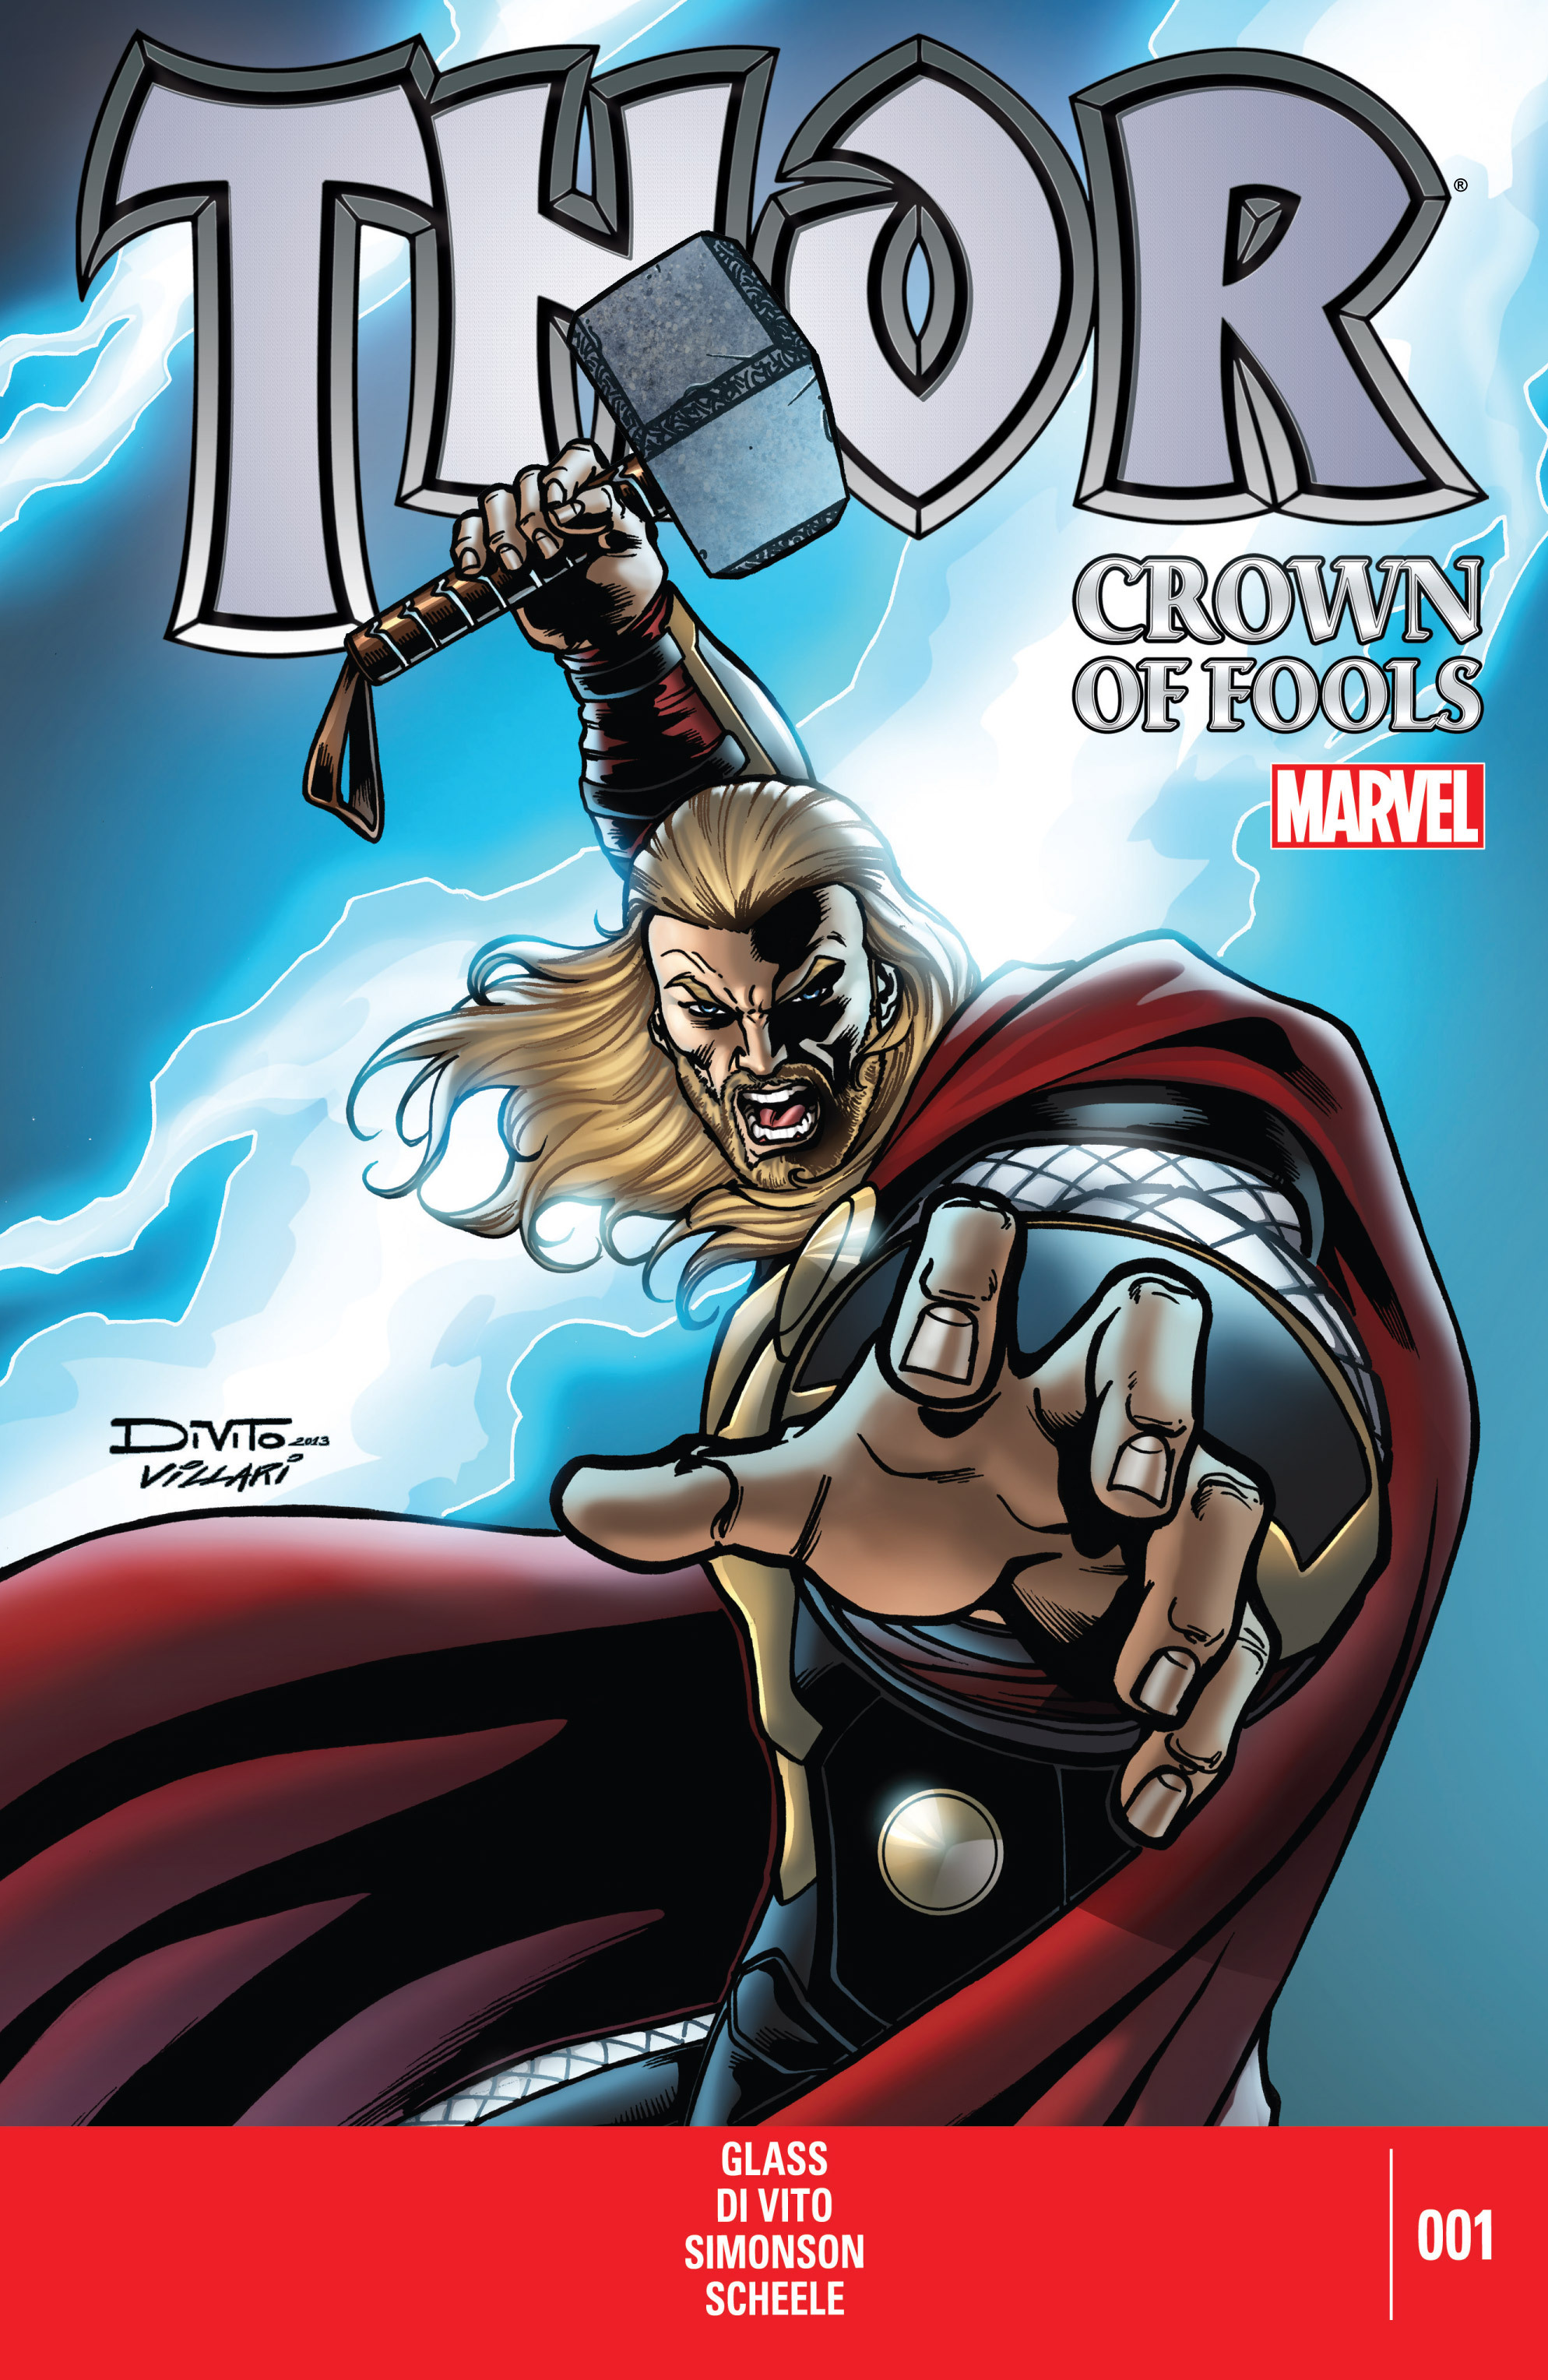 Read online Thor: The Crown of Fools comic -  Issue # Full - 1